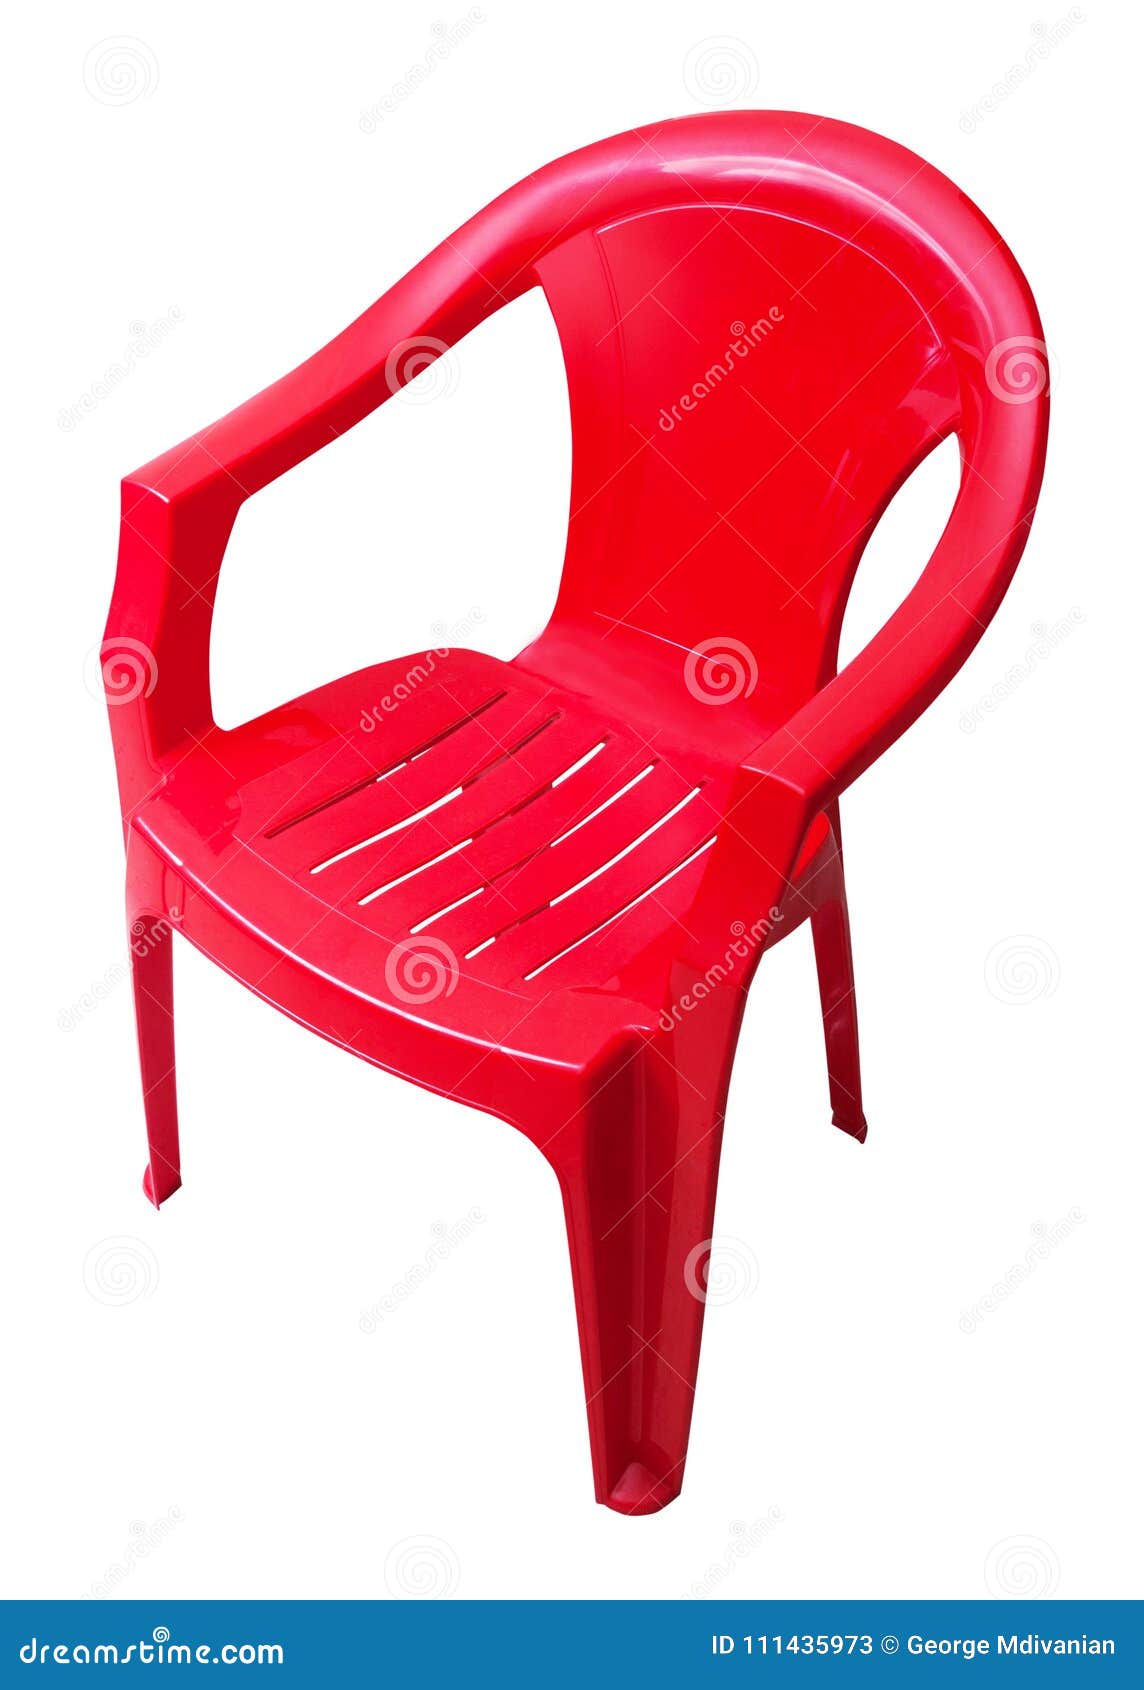 Red plastic chair isolated stock image. Image of objects